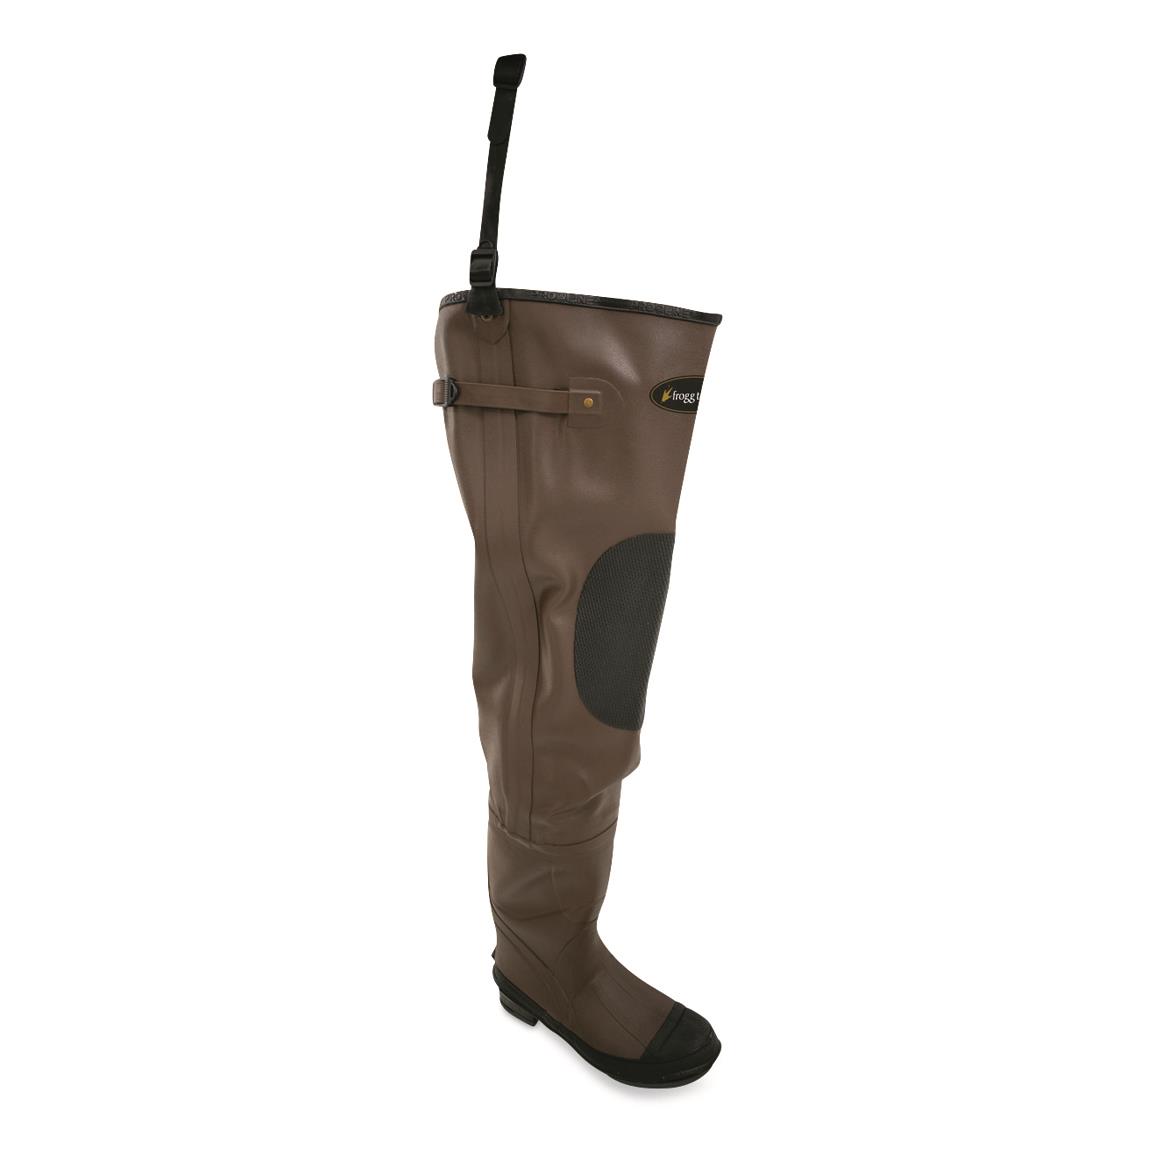 Frogg Toggs Kids' Classic II Hip Boot Waders, Cleated, Brown